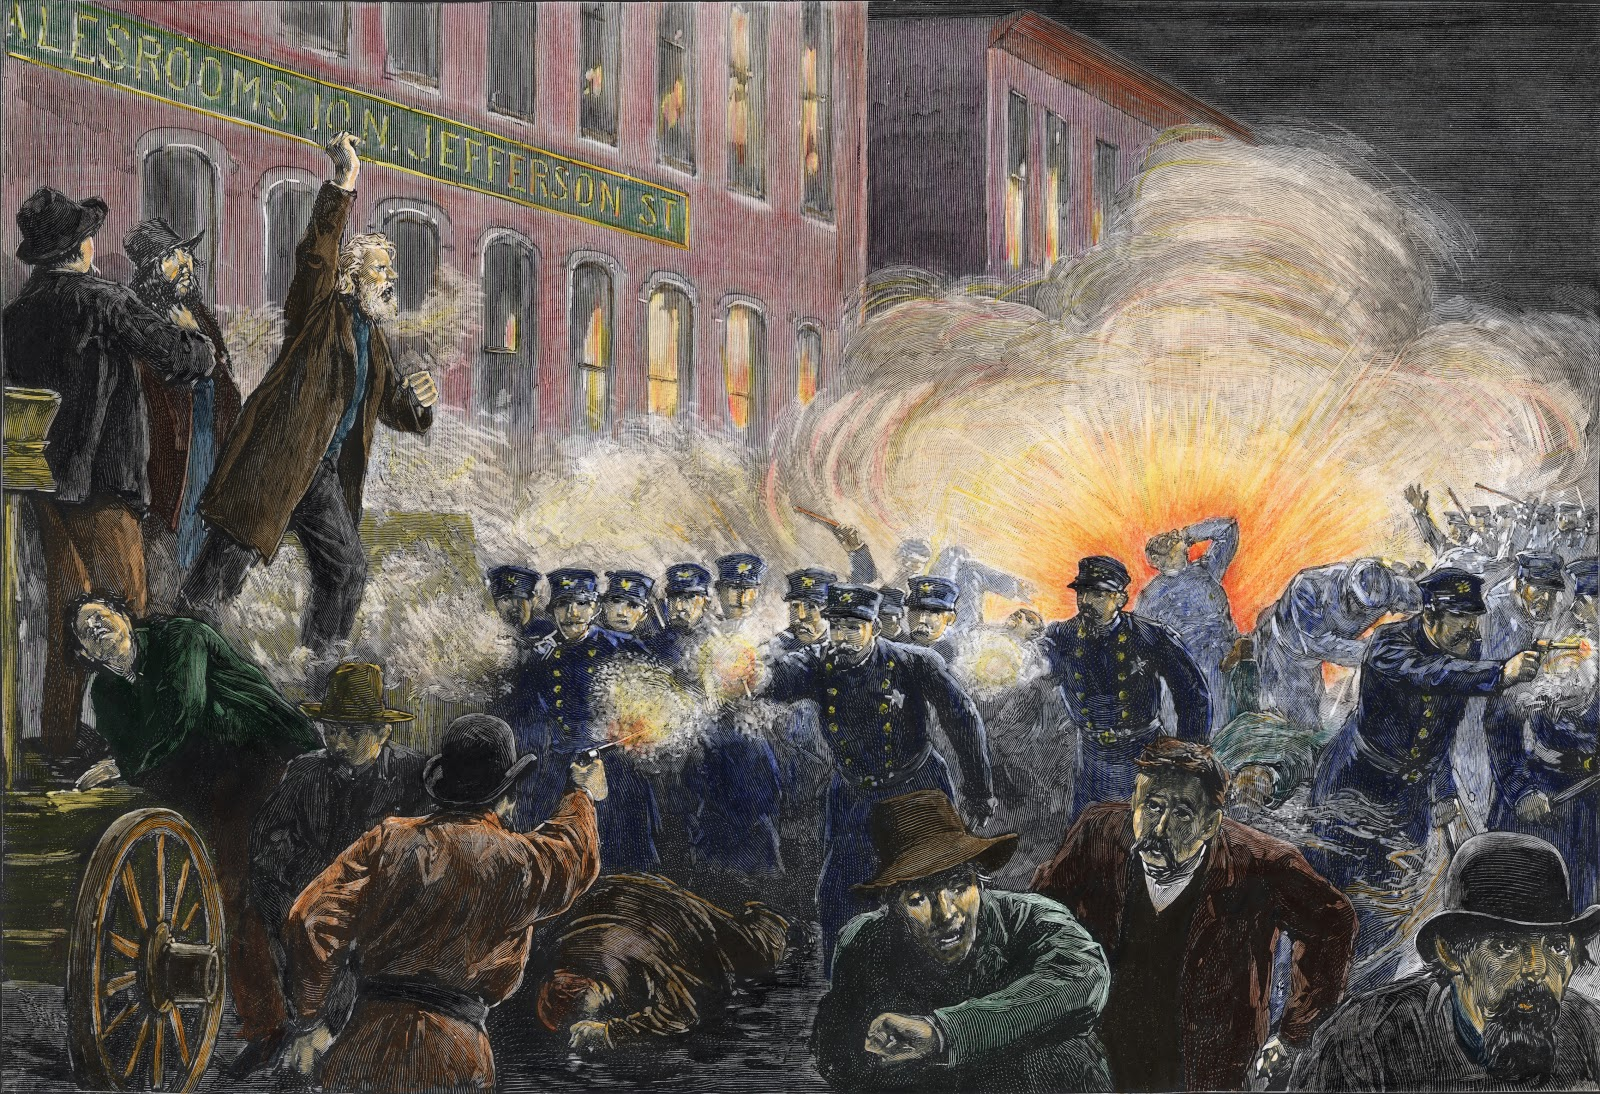 A painting depicting armed police officers and men in street clothes firing at each other in Haymarket Square.